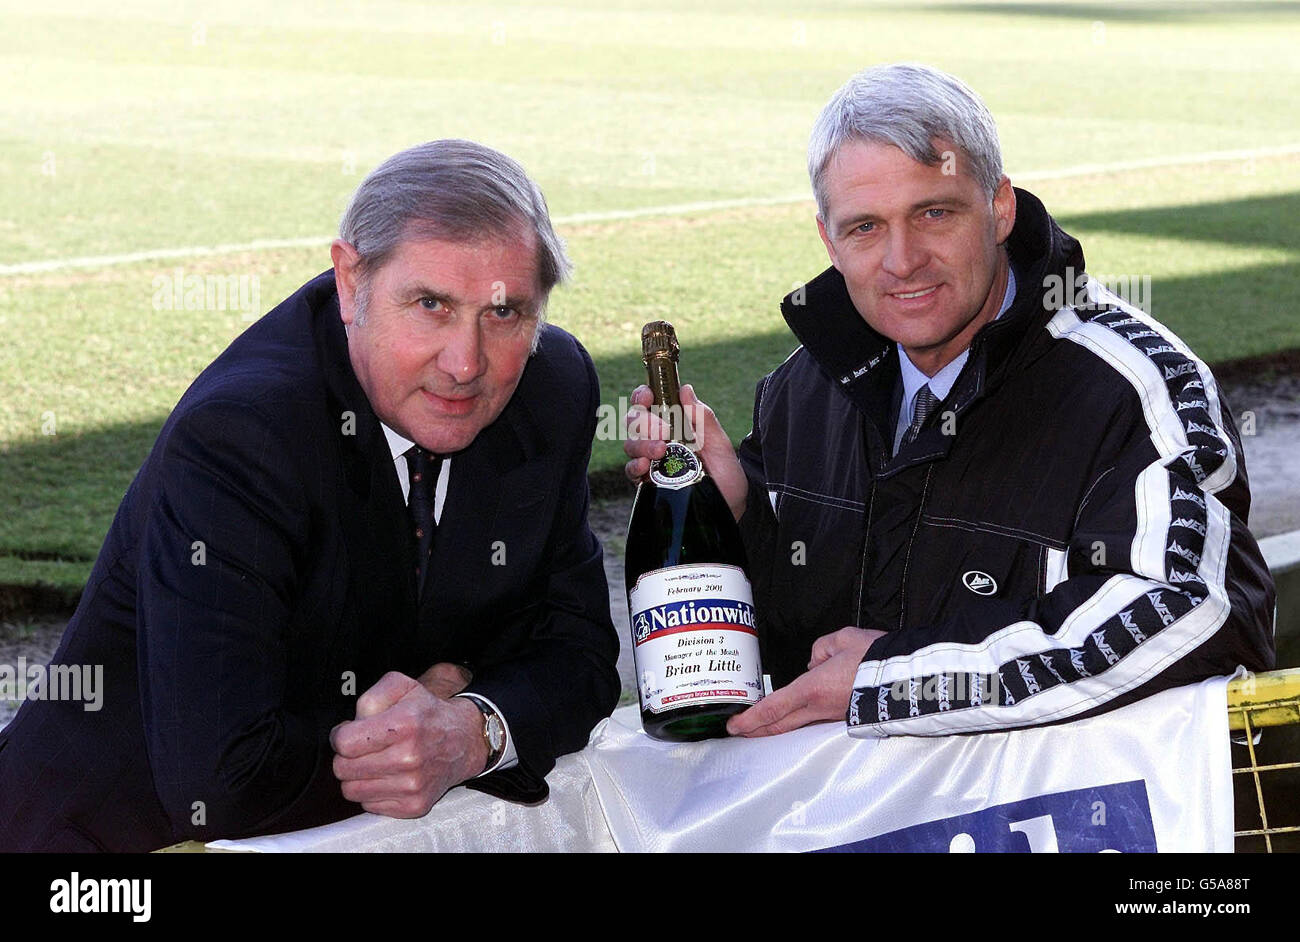 Following five straight wins Hull City manager Brian Little (R) receives his Nationwide Division Three Manager of the Month award for February 2001 from former referee Jack Taylor. * He has steered the club away from the relegation zone and was pushing the team towards the top eight despite the club's financial problems. Stock Photo